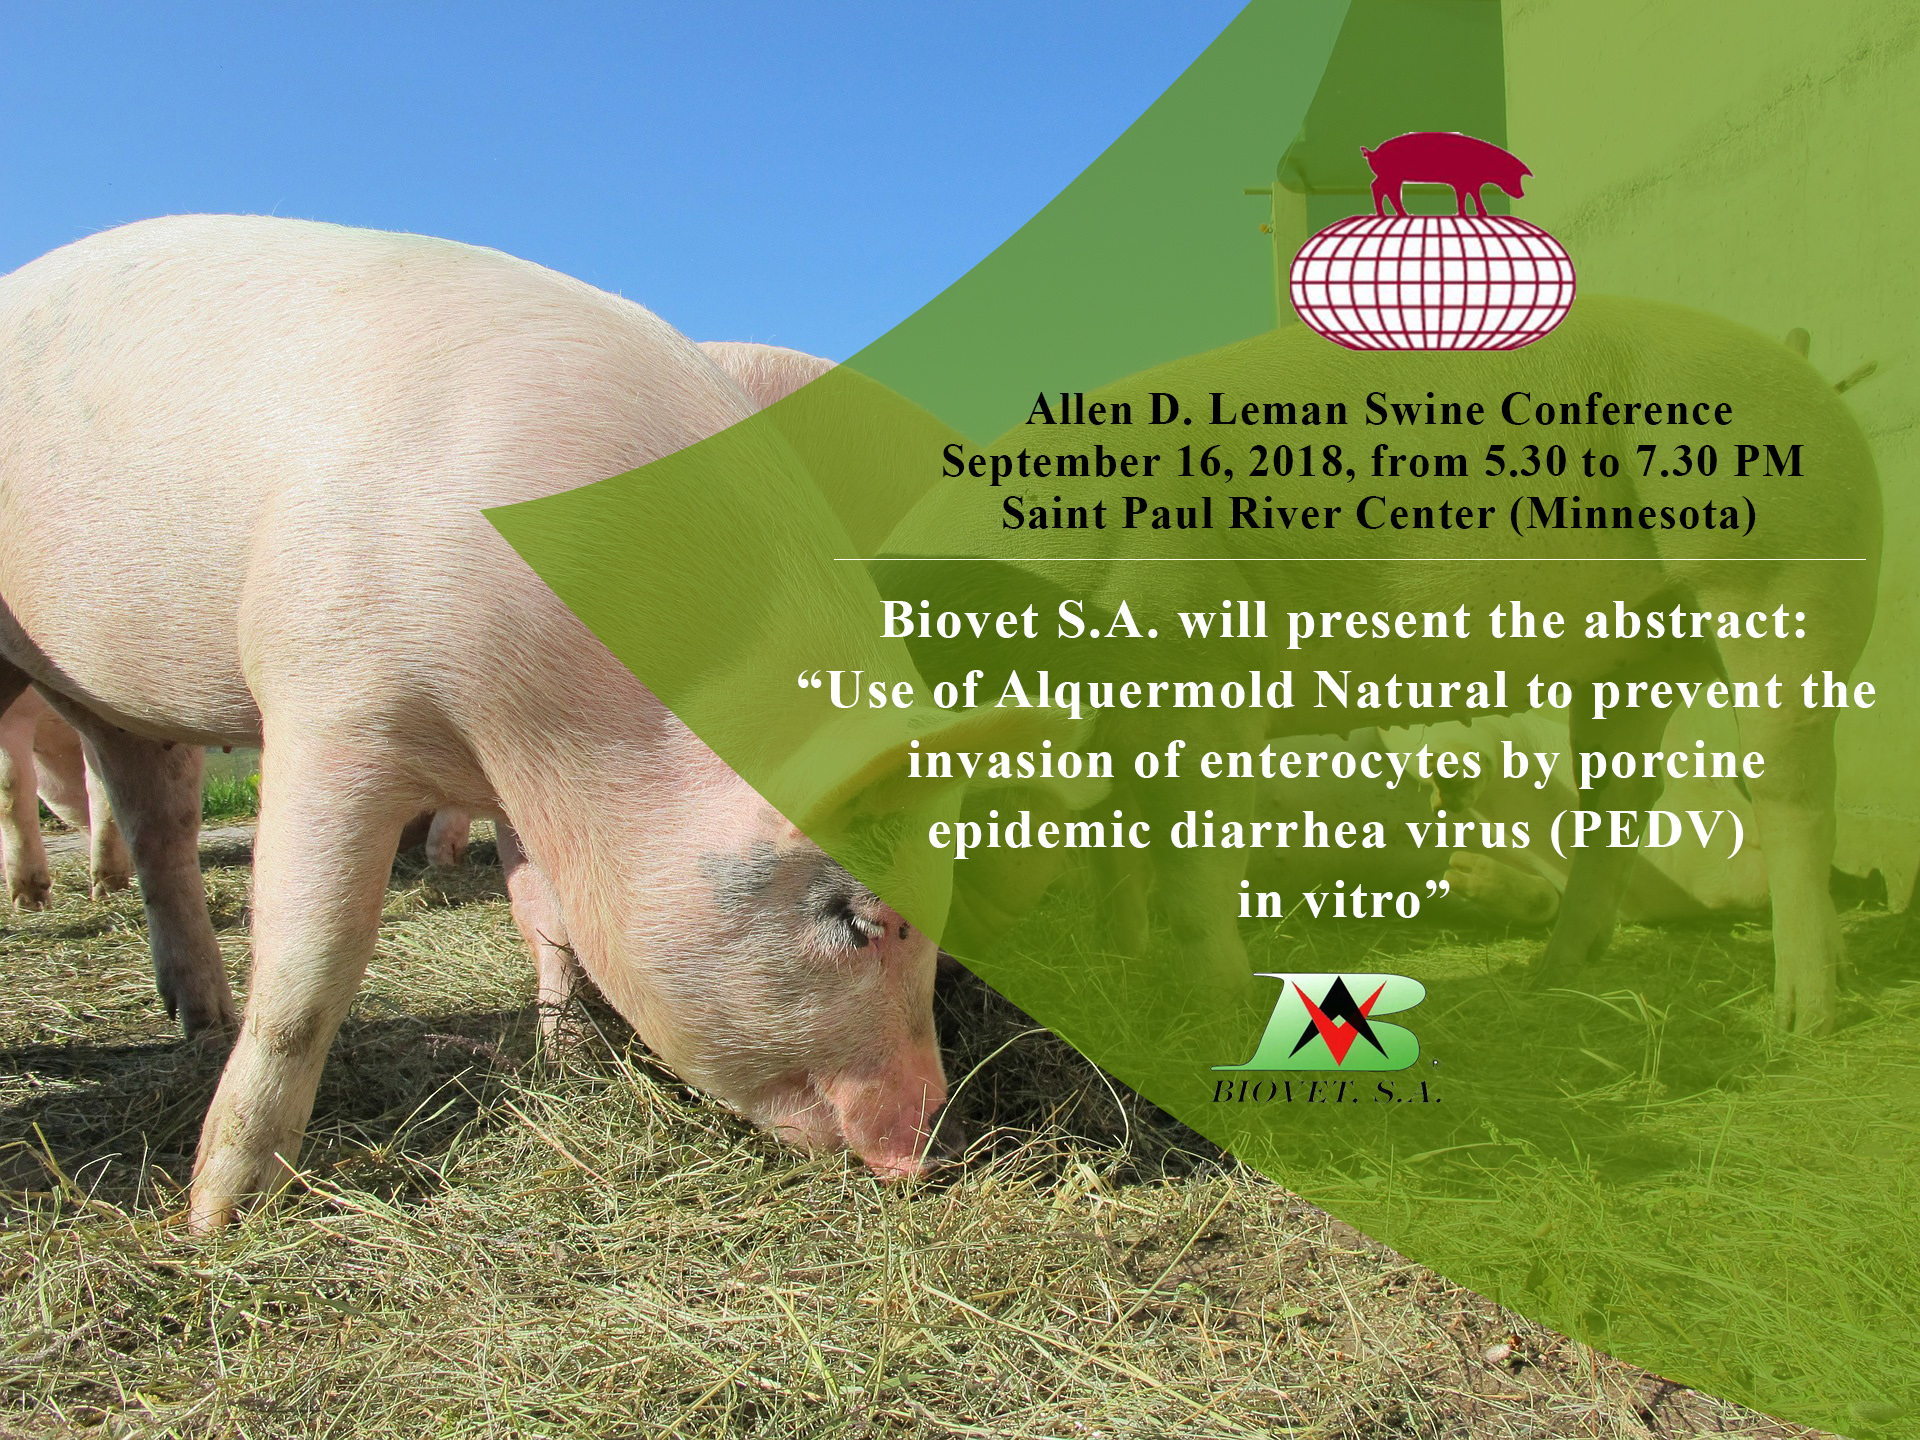 Biovet S.A. will present a poster about a natural preservative at the Allen D. Leman Swine Conference